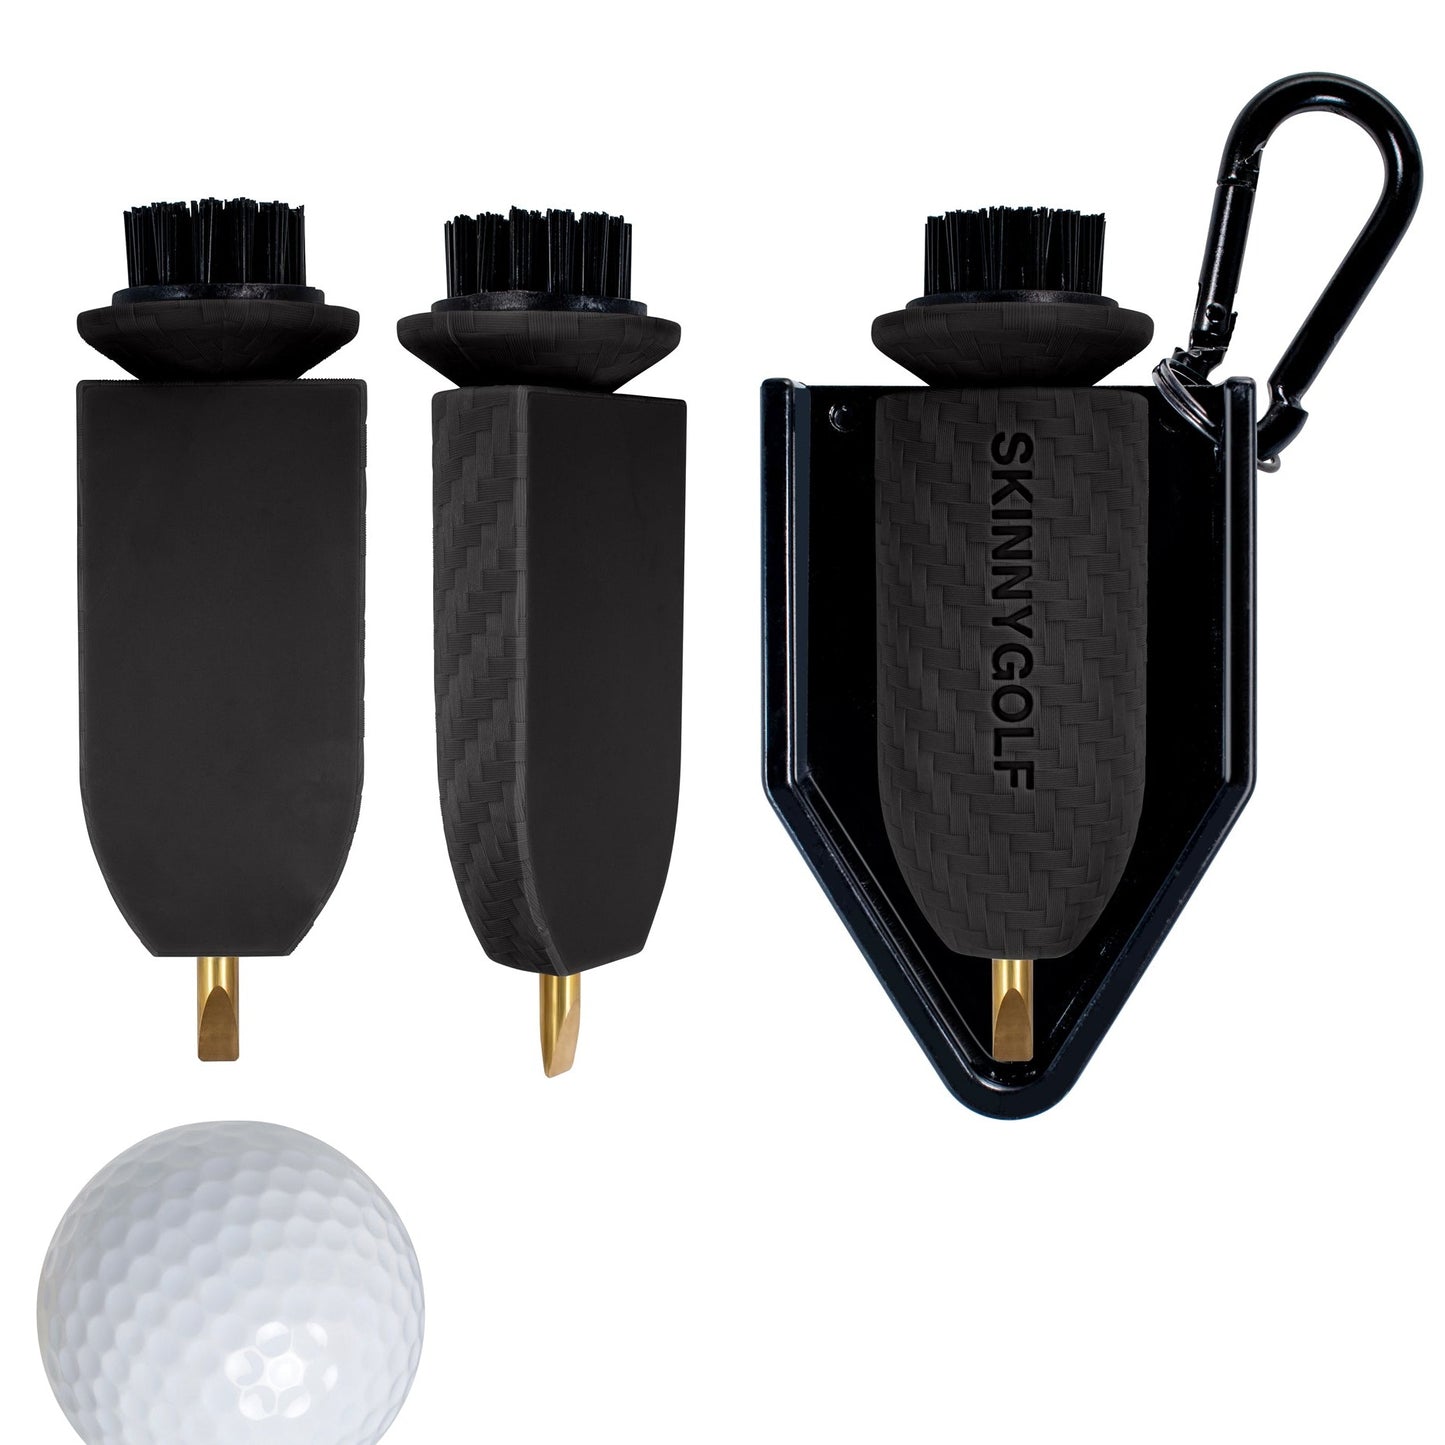 SkinnyGolf Magnetic Brush – Golf Tournament Specialists